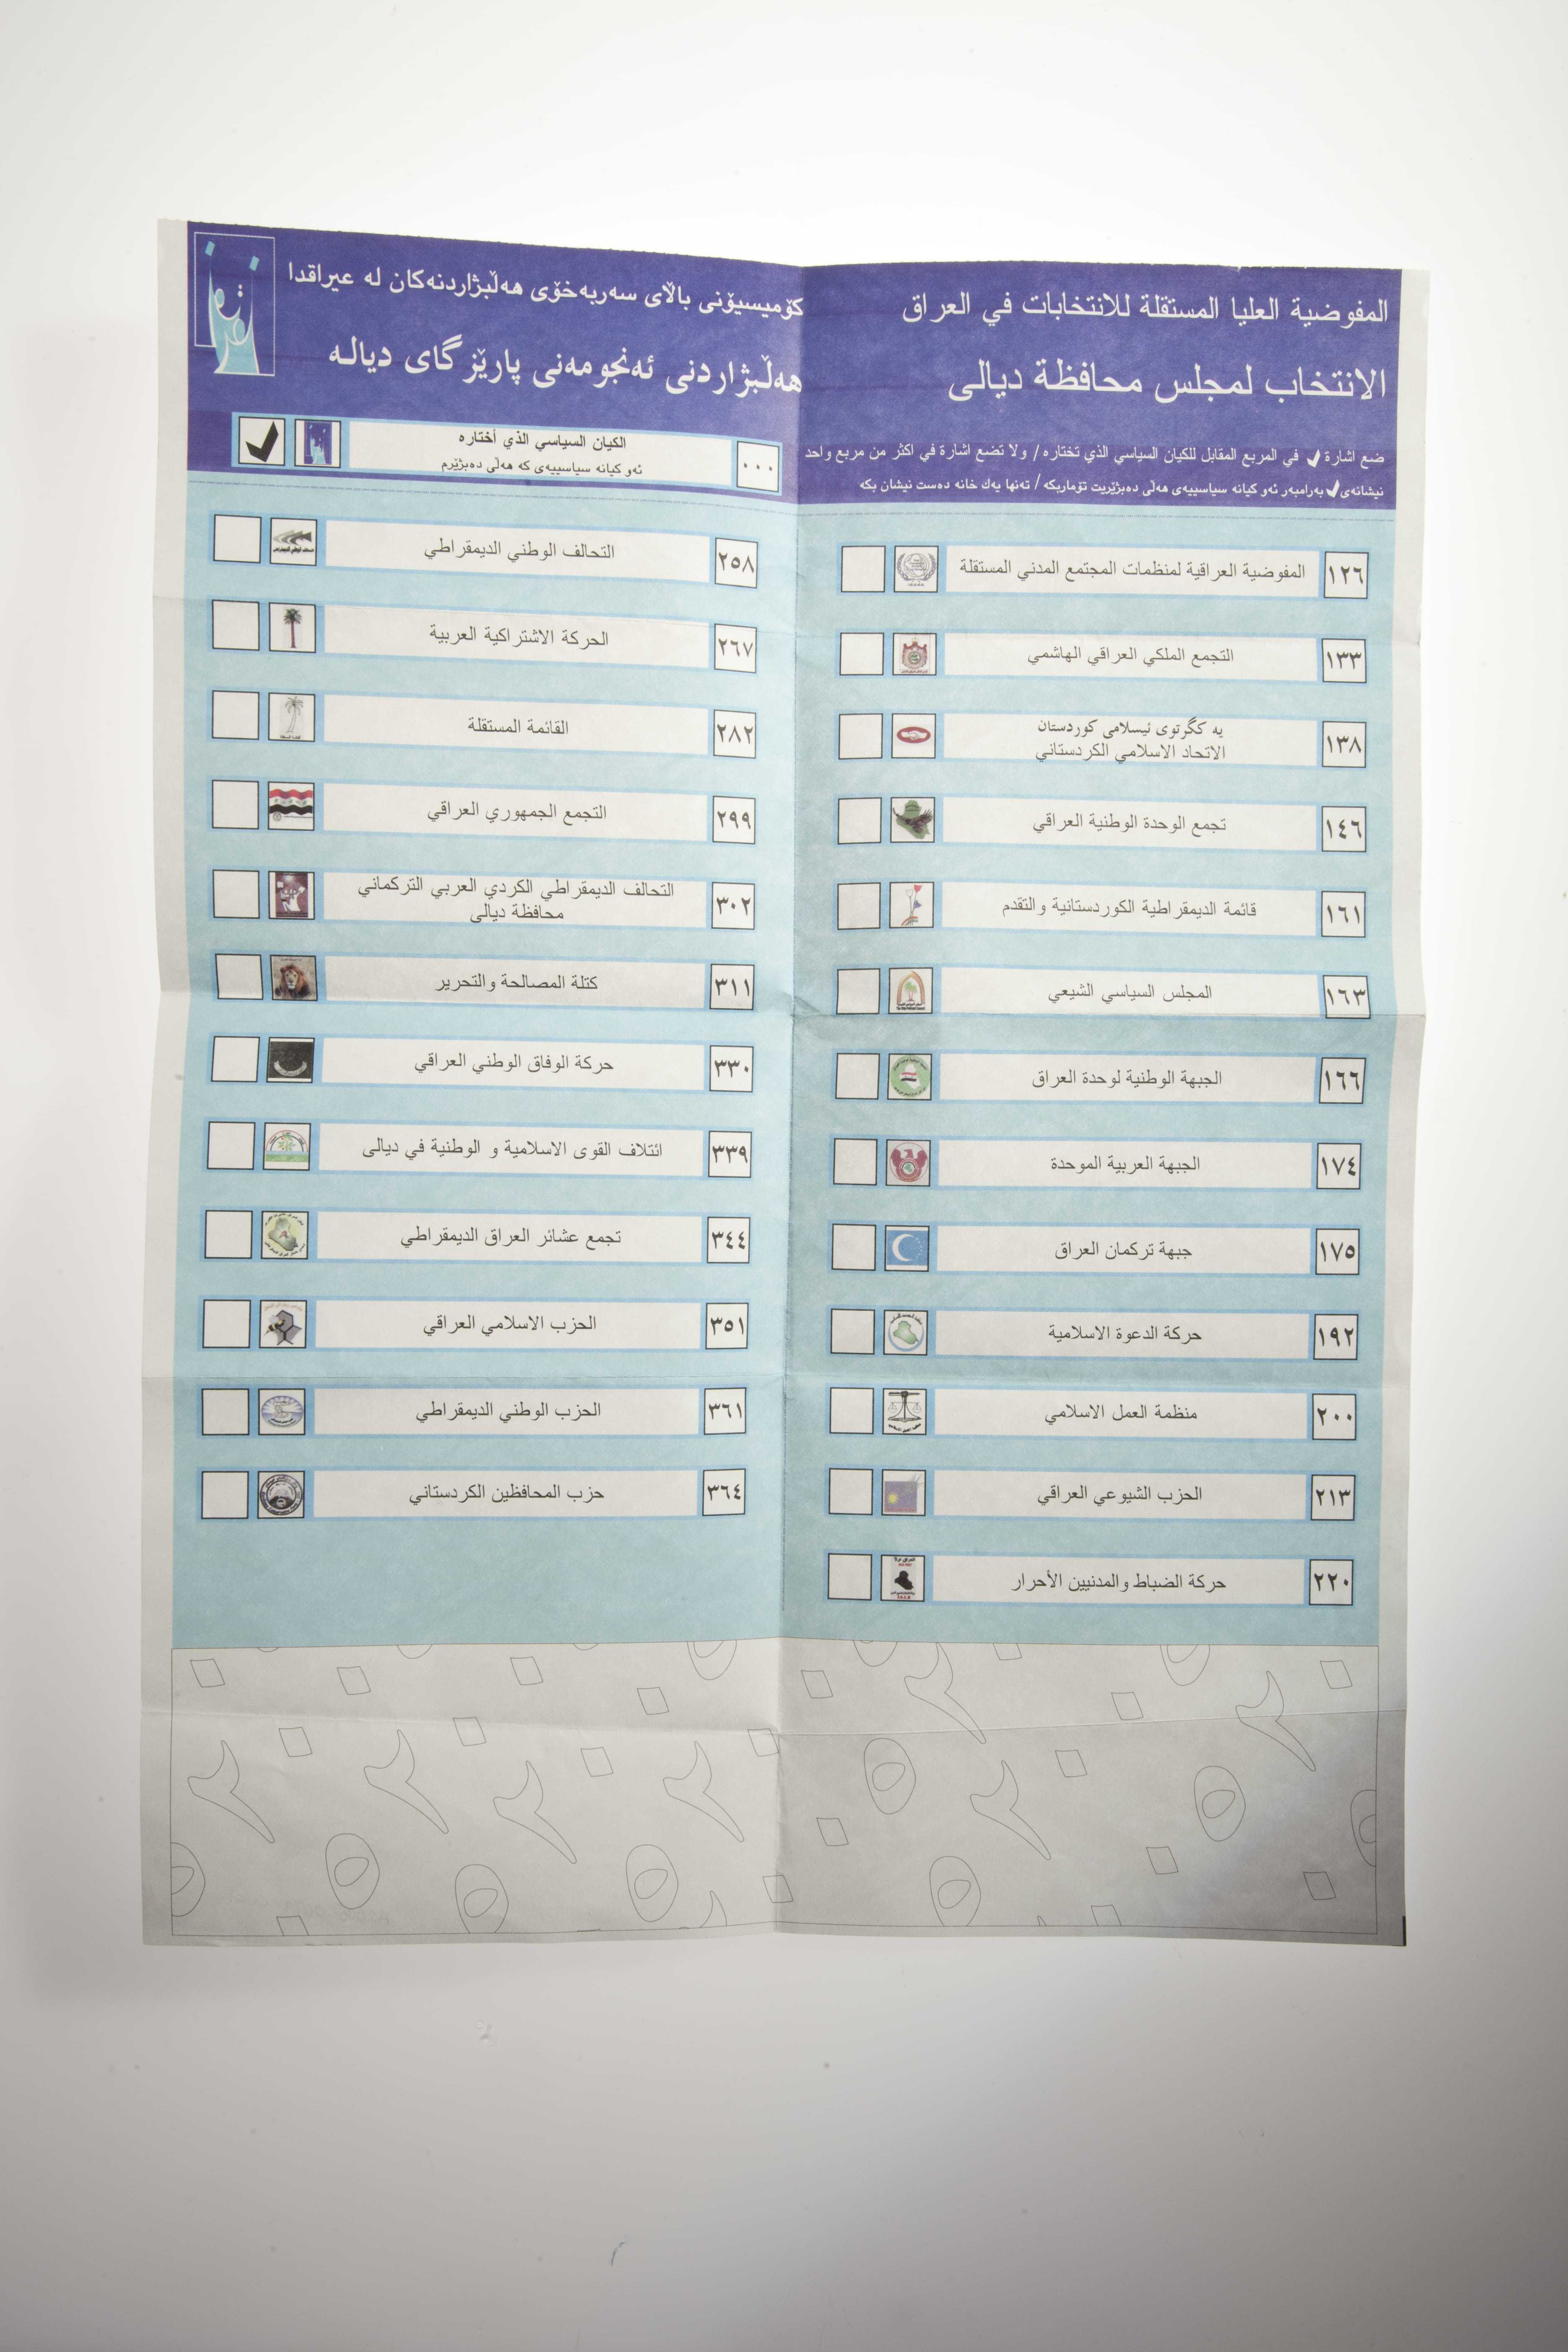 A ballot with rows of checkboxes next to names and photos representing candidates.